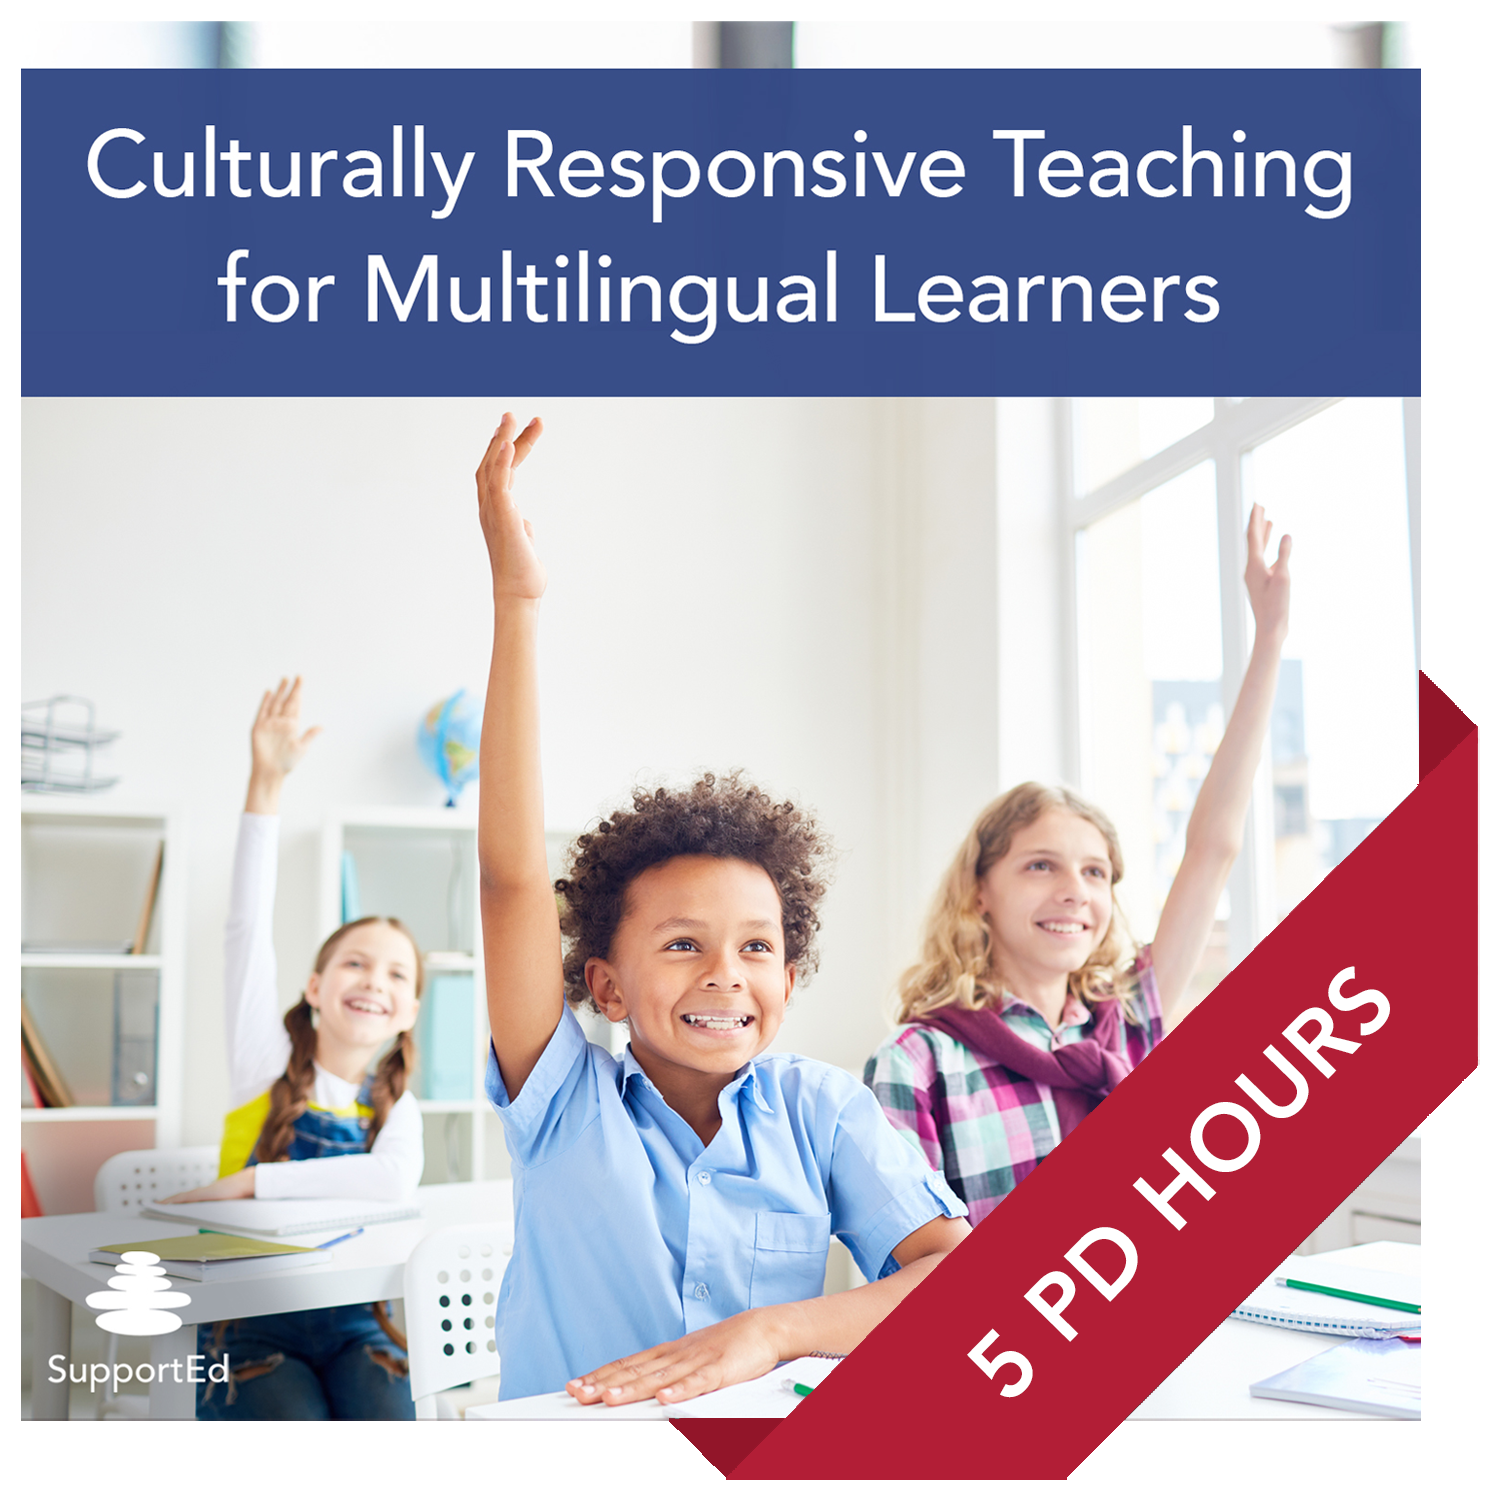 course icon image for Culturally Responsive Teaching for Multilingual Learners